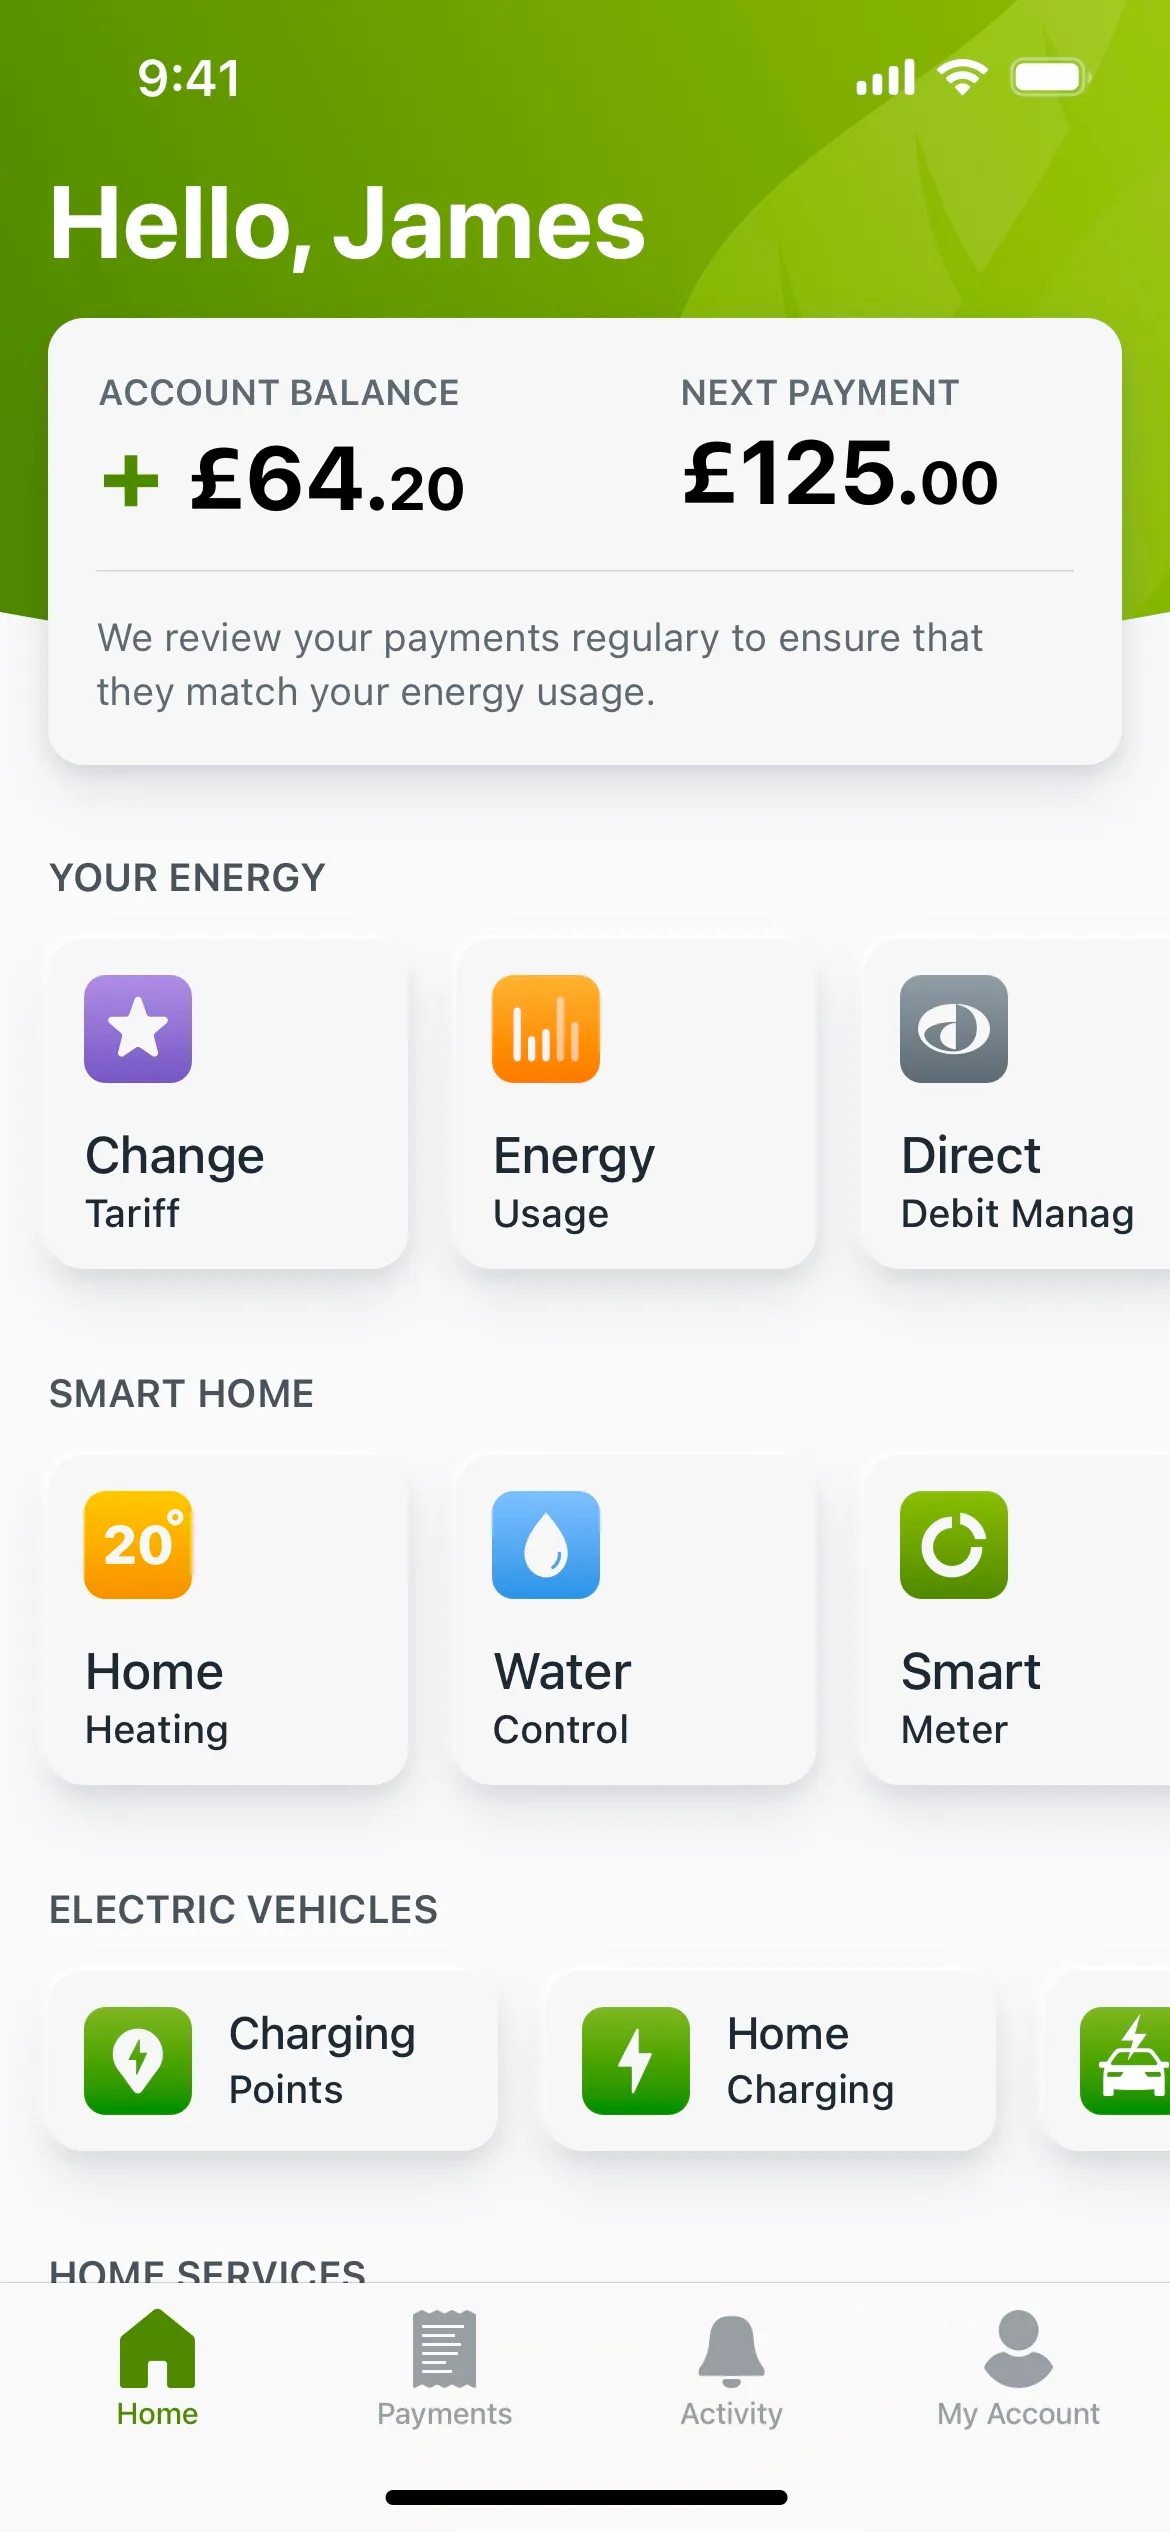 Image of a utilities mobile app's home screen displaying a personalized greeting 'Hello, James' at the top. The screen features an account summary with a positive balance of £64.20 and a 'Next Payment' due of £125.00, along with a note about regular reviews to match payments with energy usage. Below, sections are divided into 'Your Energy' with options like 'Change Tariff', 'Energy Usage', and 'Direct Debit Manag'; 'Smart Home' with controls for 'Home Heating', 'Water Control', and 'Smart Meter'; and 'Electric Vehicles' offering 'Charging Points' and 'Home Charging' options. The interface is clean with icons and labels for each function, and the bottom navigation bar includes 'Home', 'Payments', 'Activity', and 'My Account'.